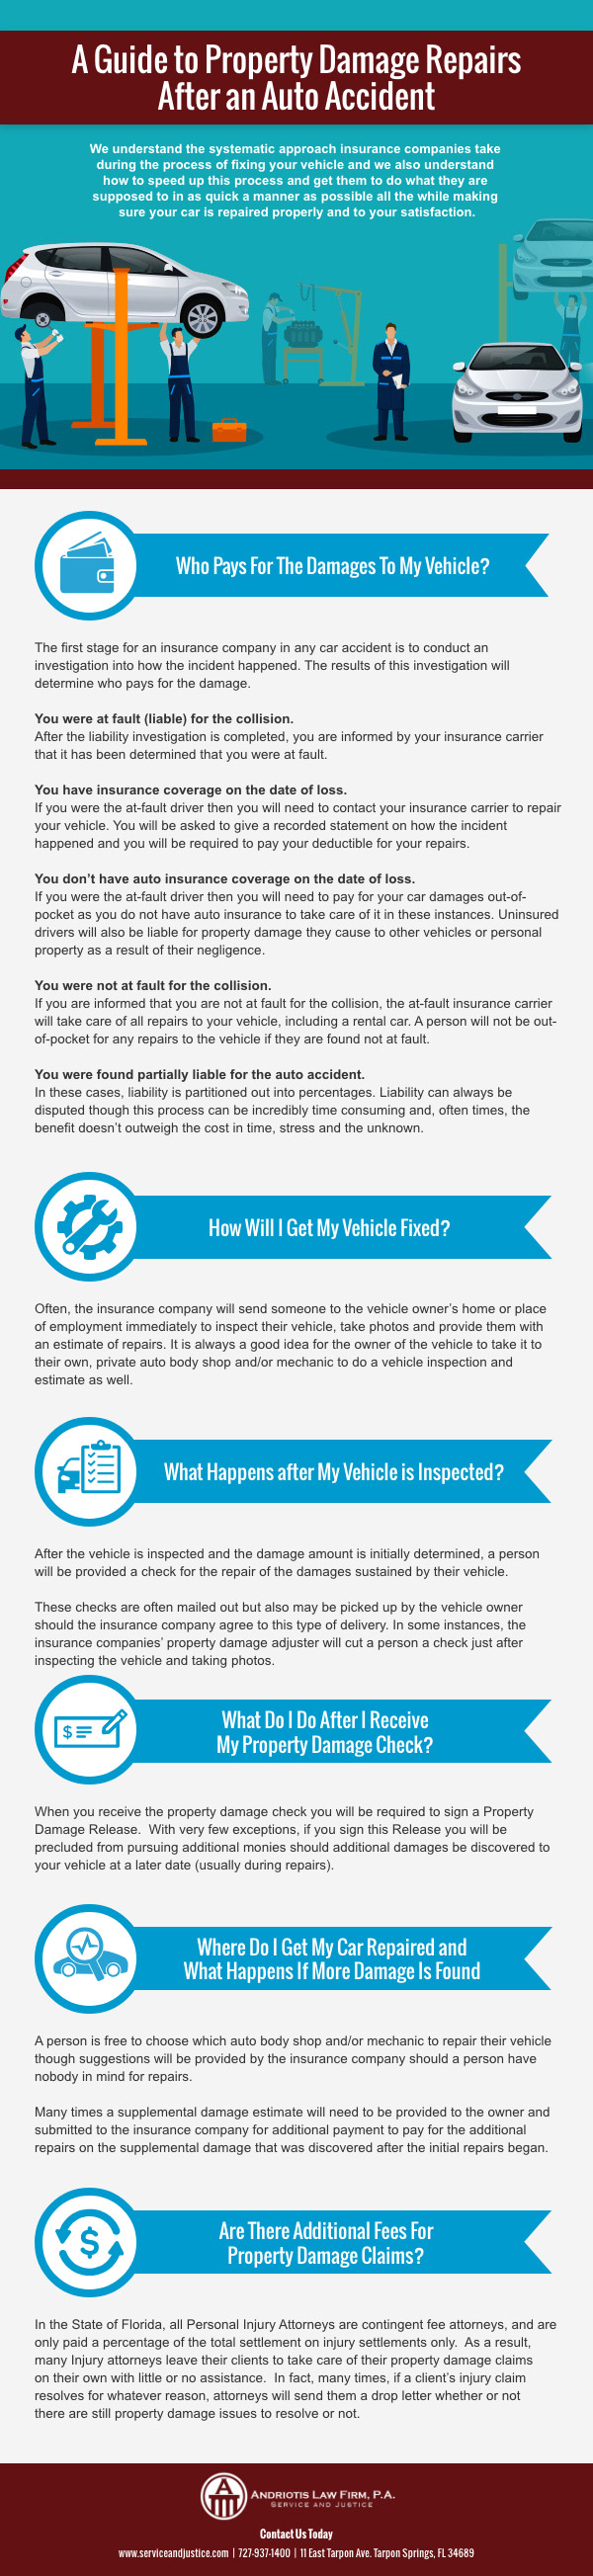 andriotis-repairing-car-after-accident-infographic